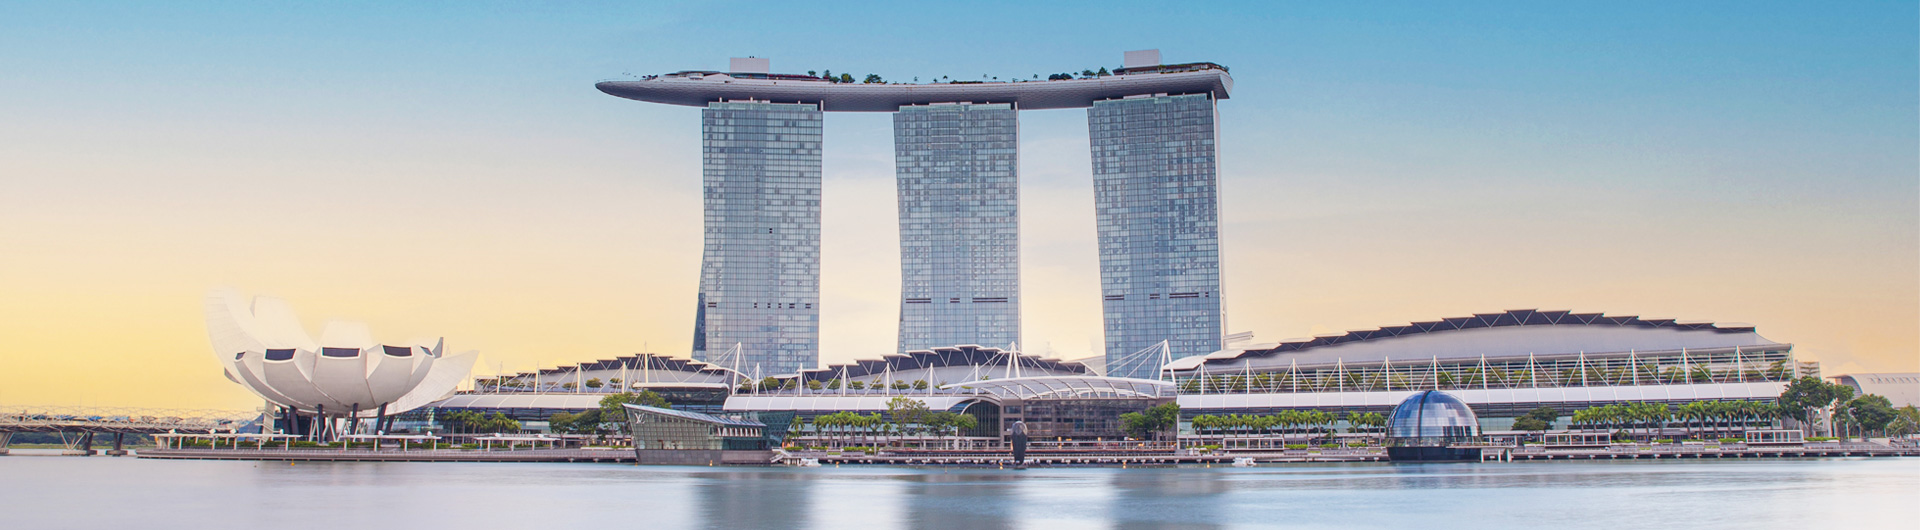 Welcome to Marina Bay Sands